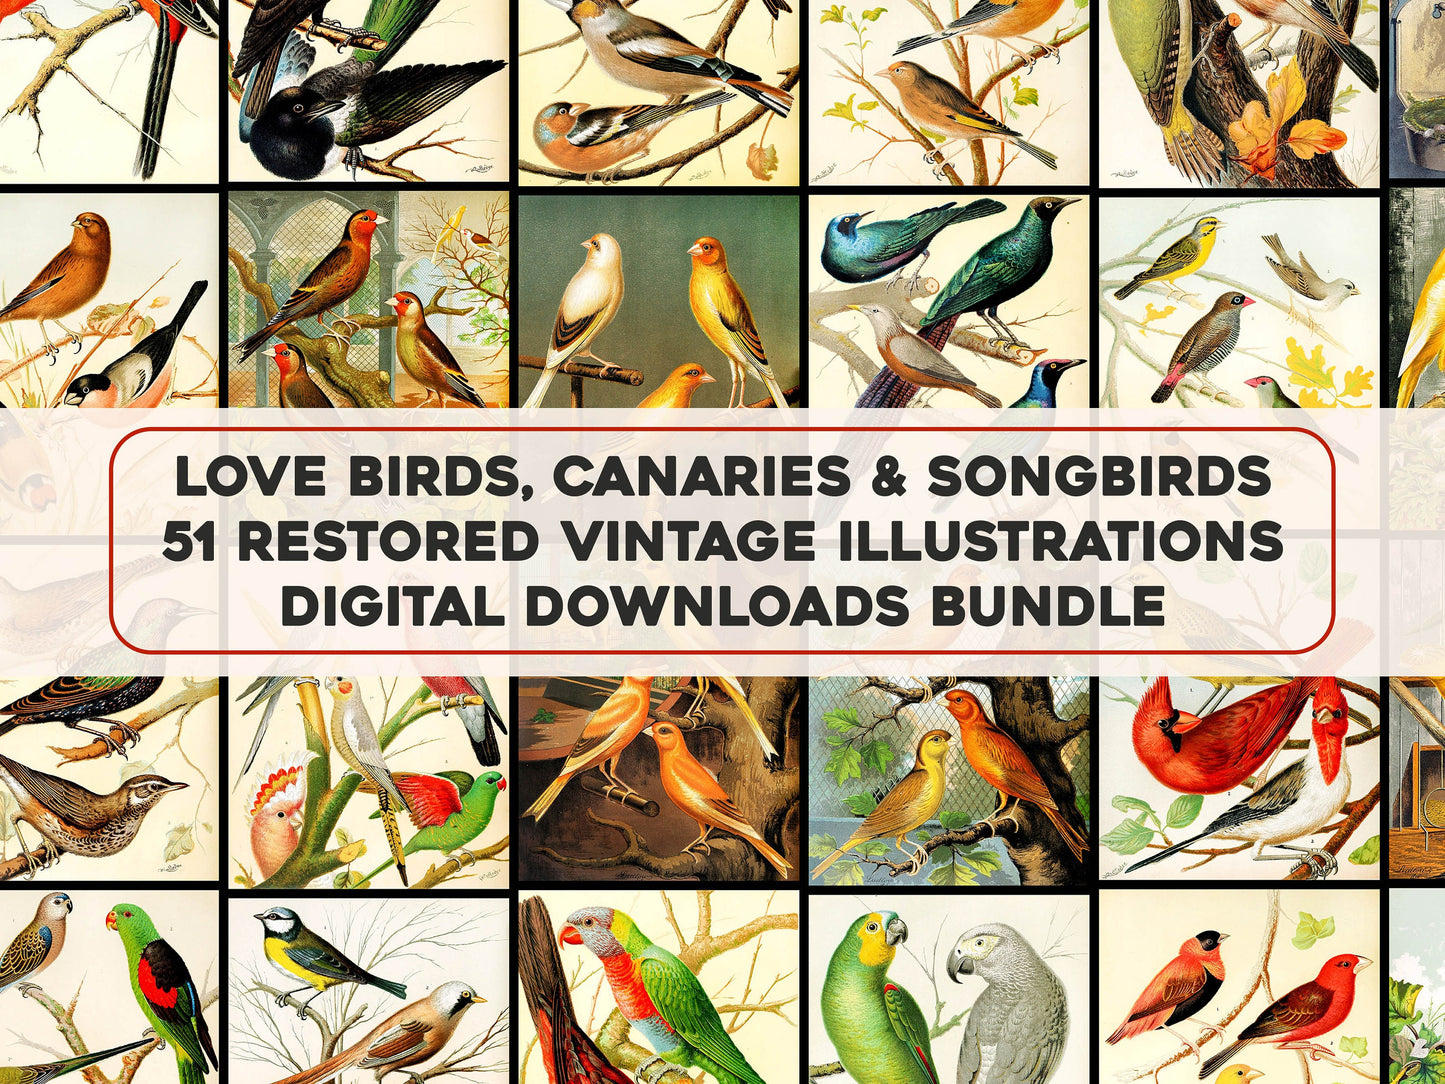 Illustrated Book of Canaries and Cage Birds British and Foreign [51 Images]